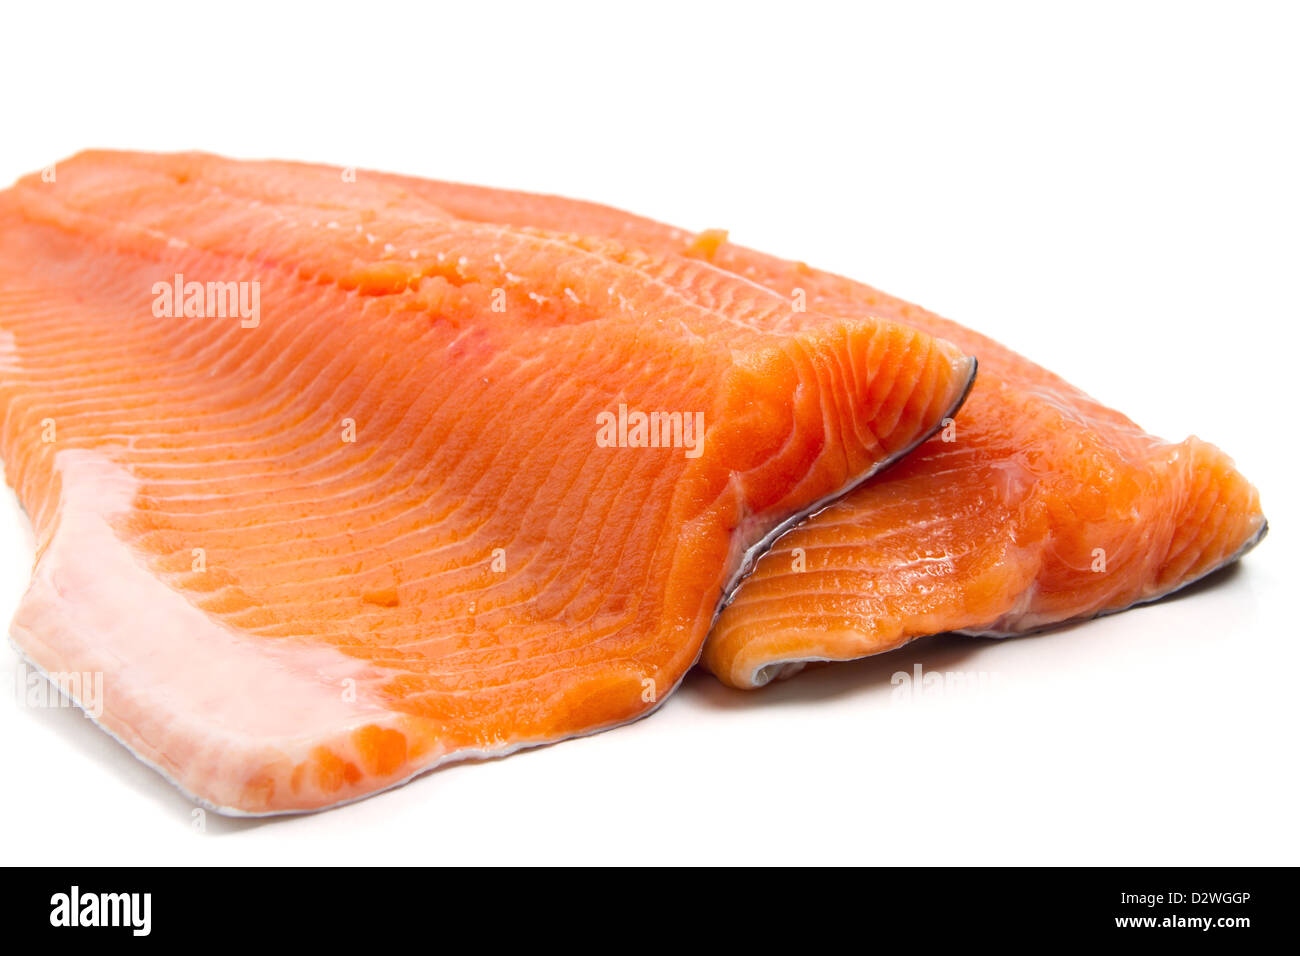 detail of salmon trout fillets over white background Stock Photo